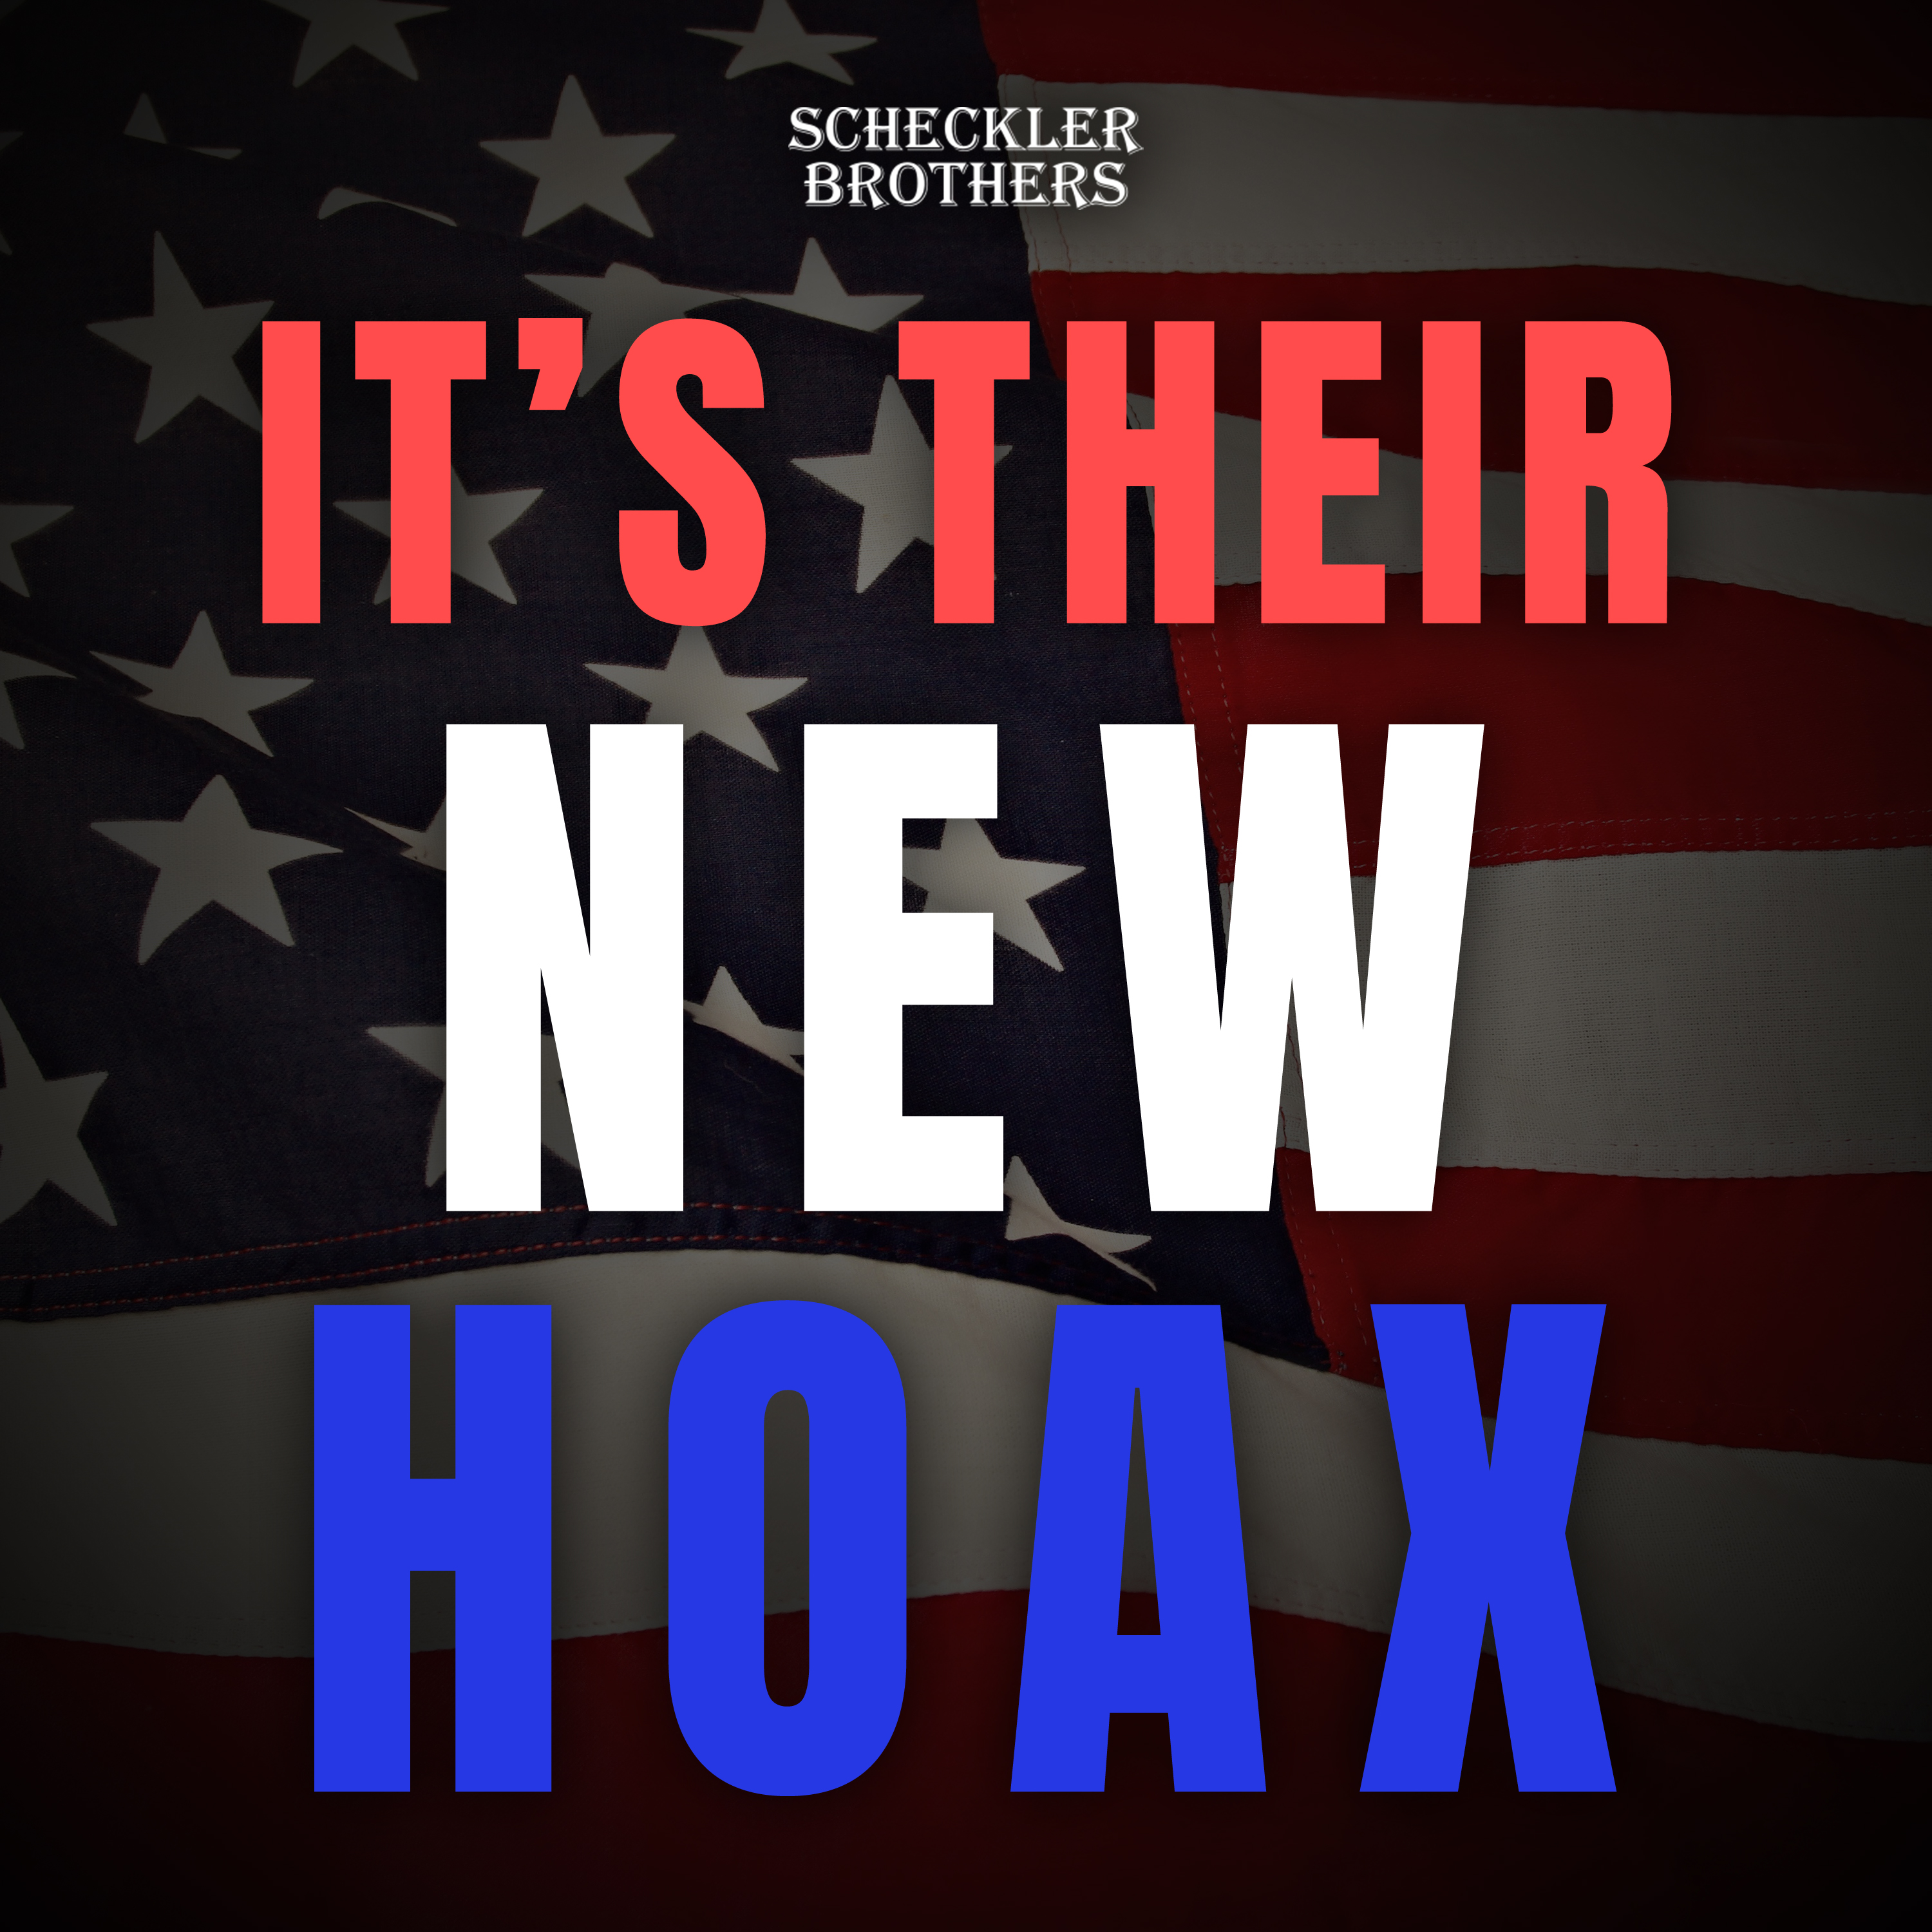 It's Their New Hoax by the Scheckler Brothers